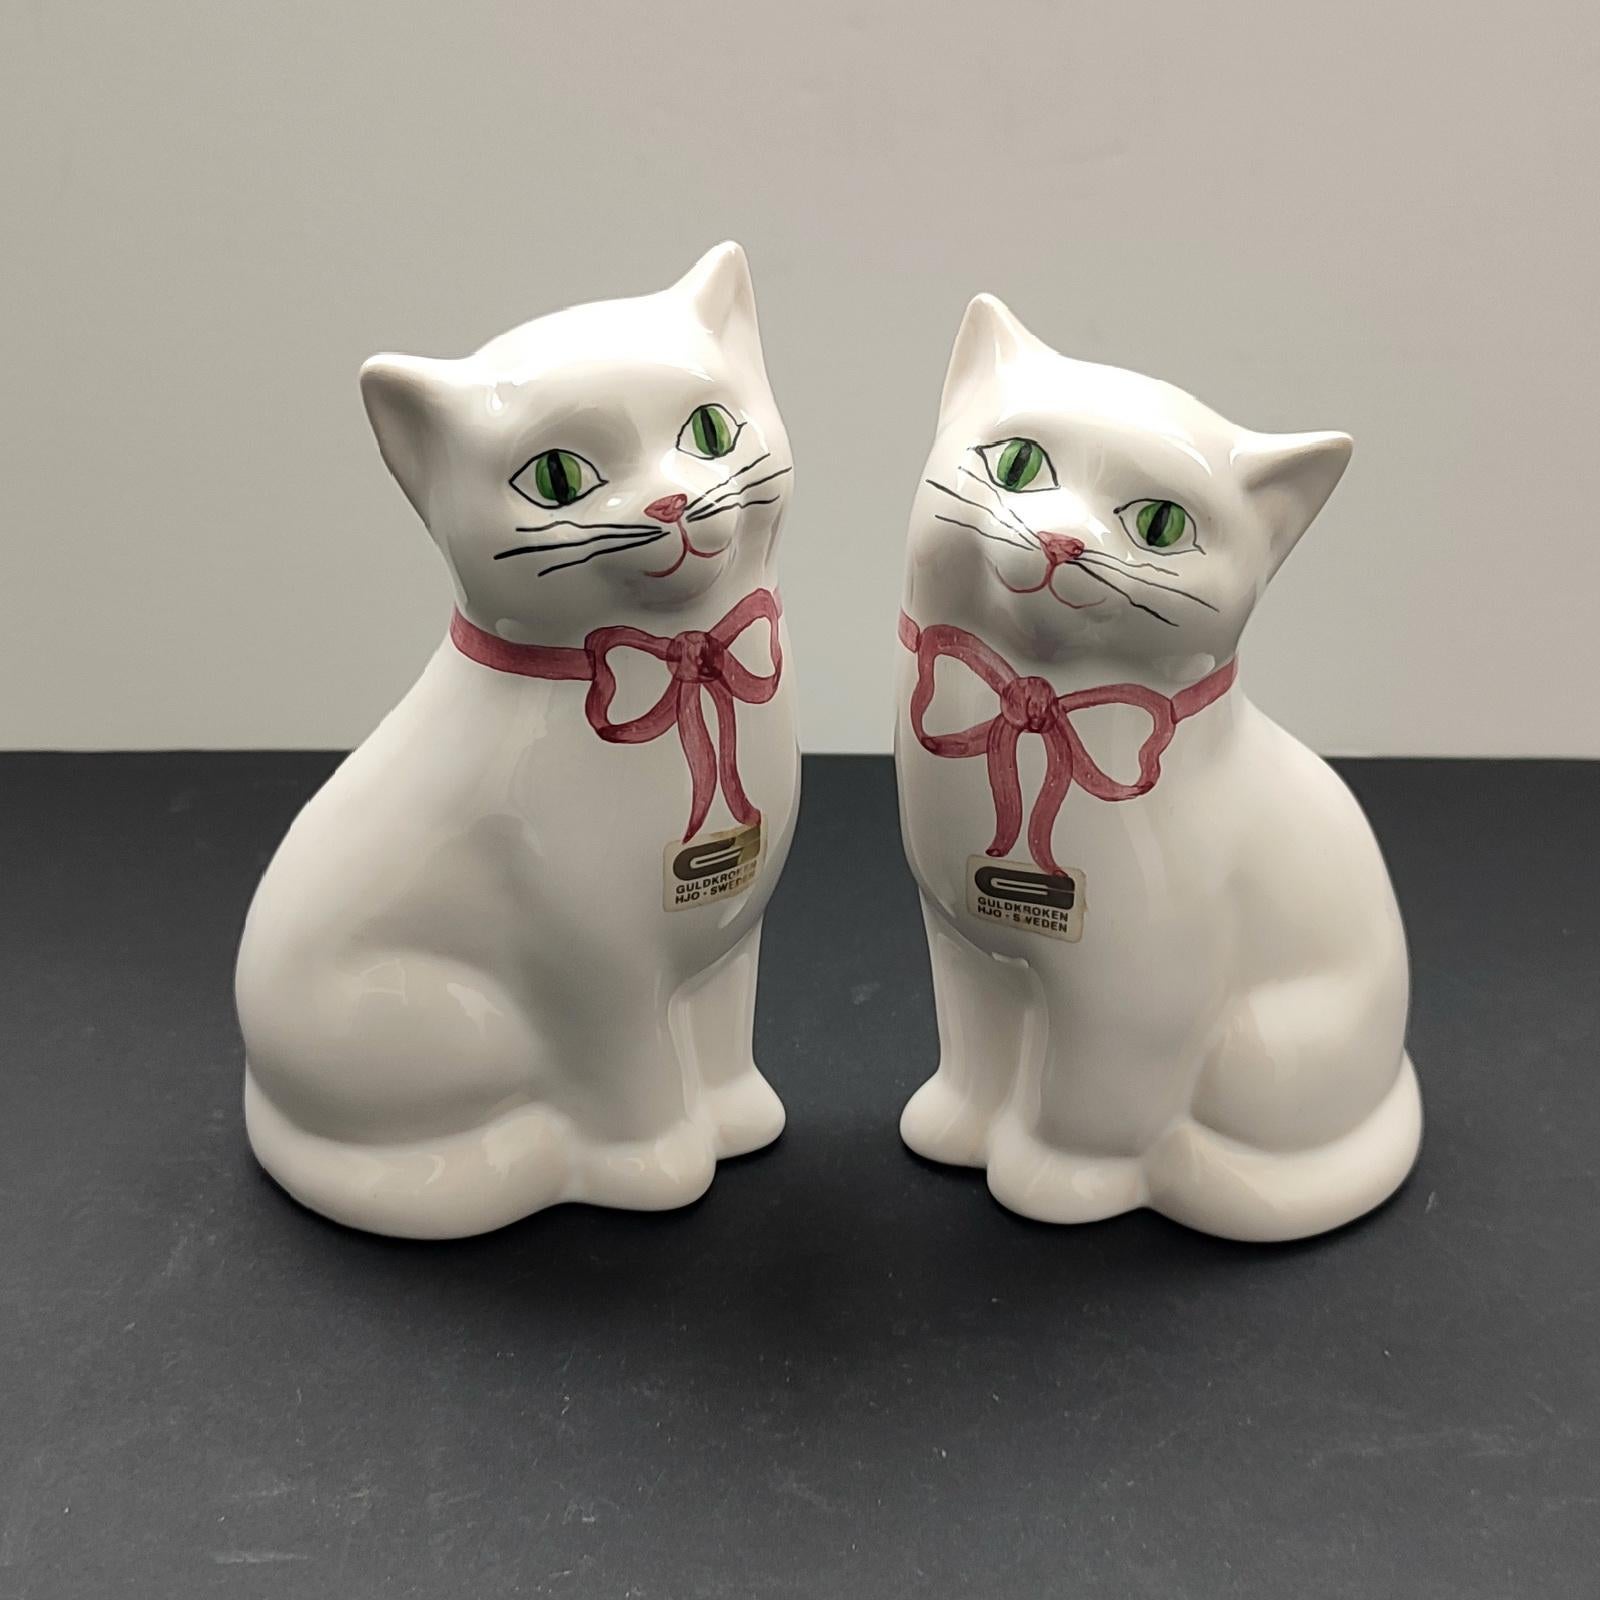 Rare Swedish porcelain cat from Guldkroken in Hjo. Vintage. White hand painted facial features & pink bows. Made in Sweden in the 70s. Original makers label.
Excellent condition.
Dimensions: 
Height: 18 cm [7”], Width: 11 cm [4,3”], Depth: 8 cm